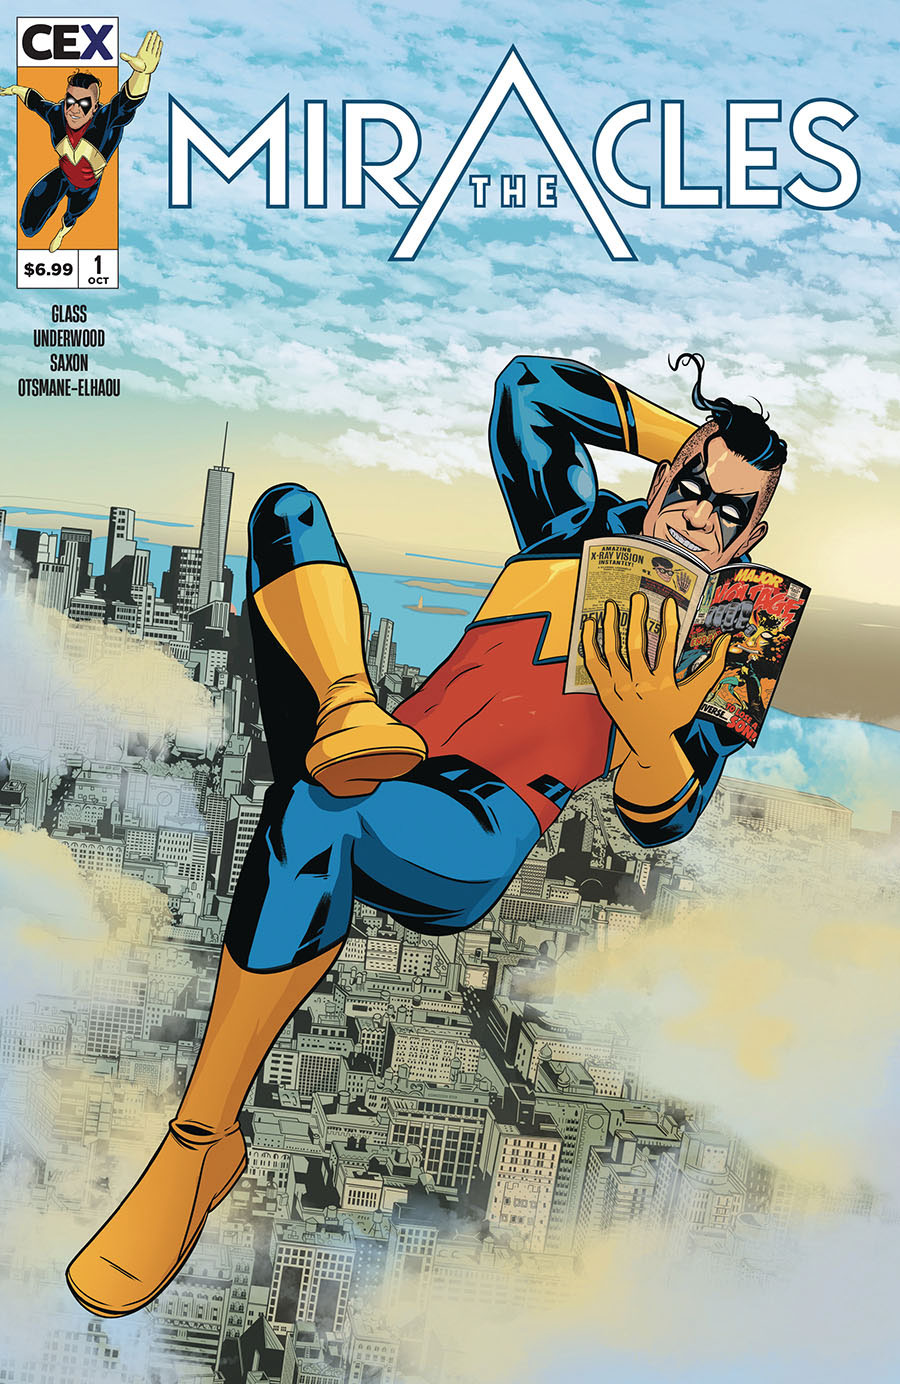 Miracles #1 Cover A Regular Vince Underwood Cover